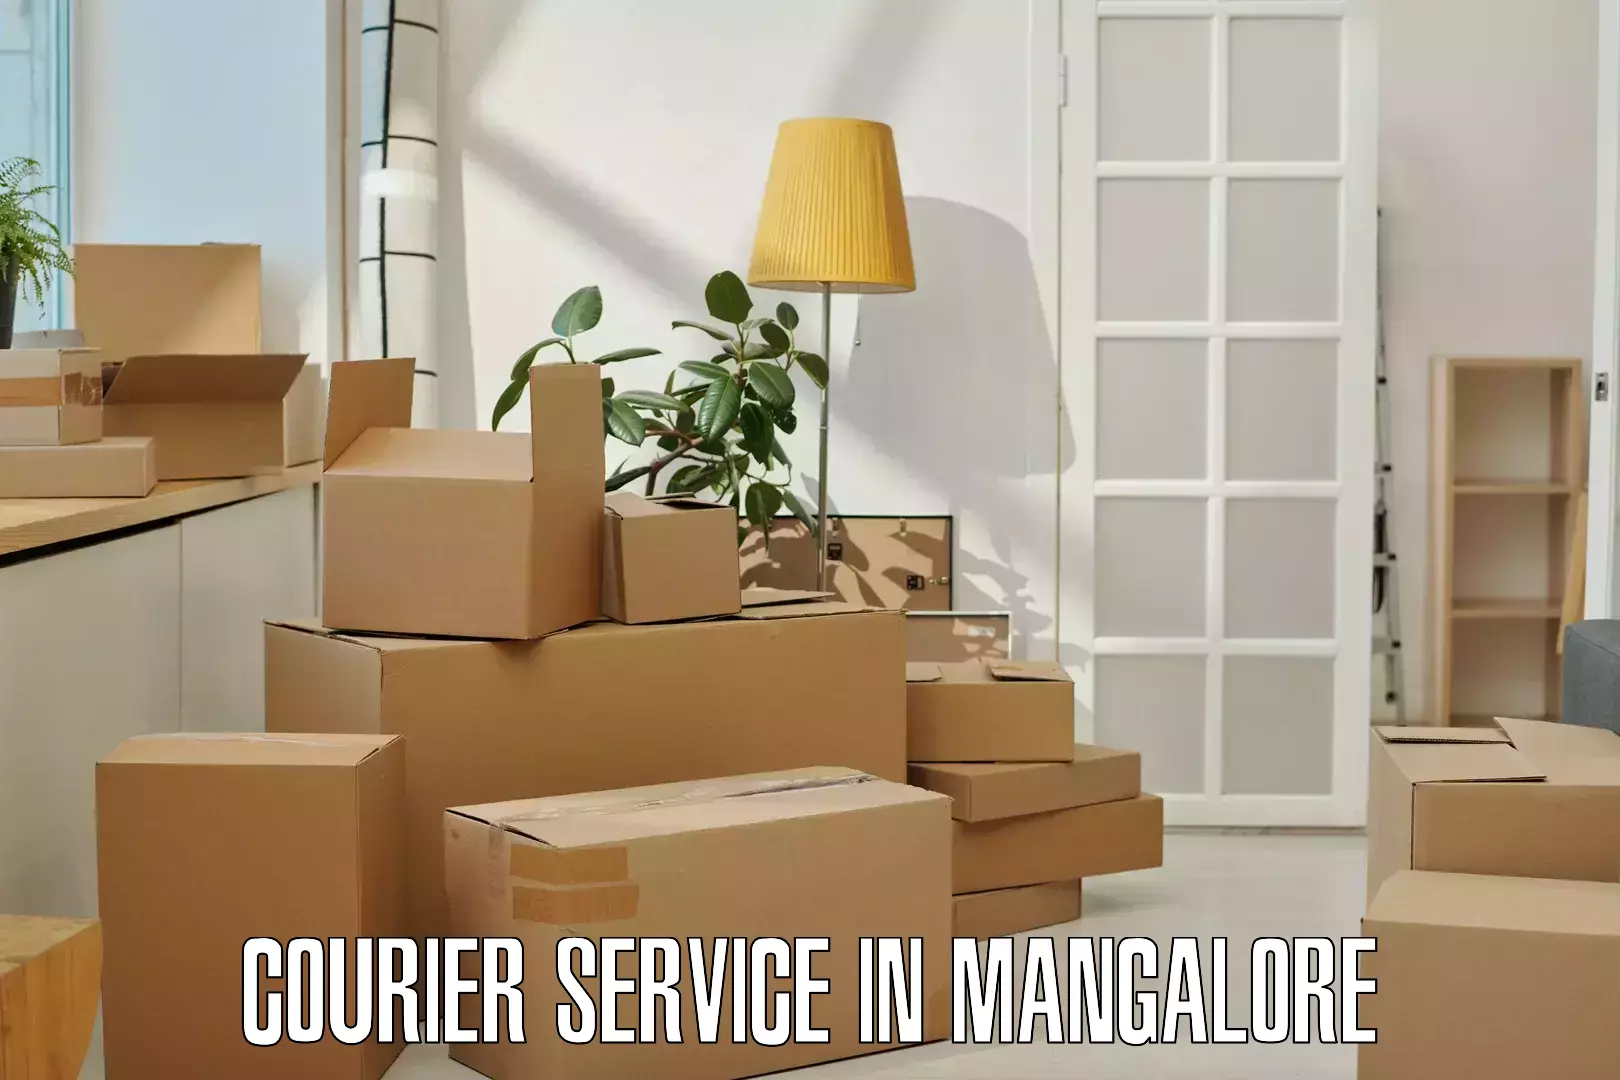 Automated parcel services in Mangalore